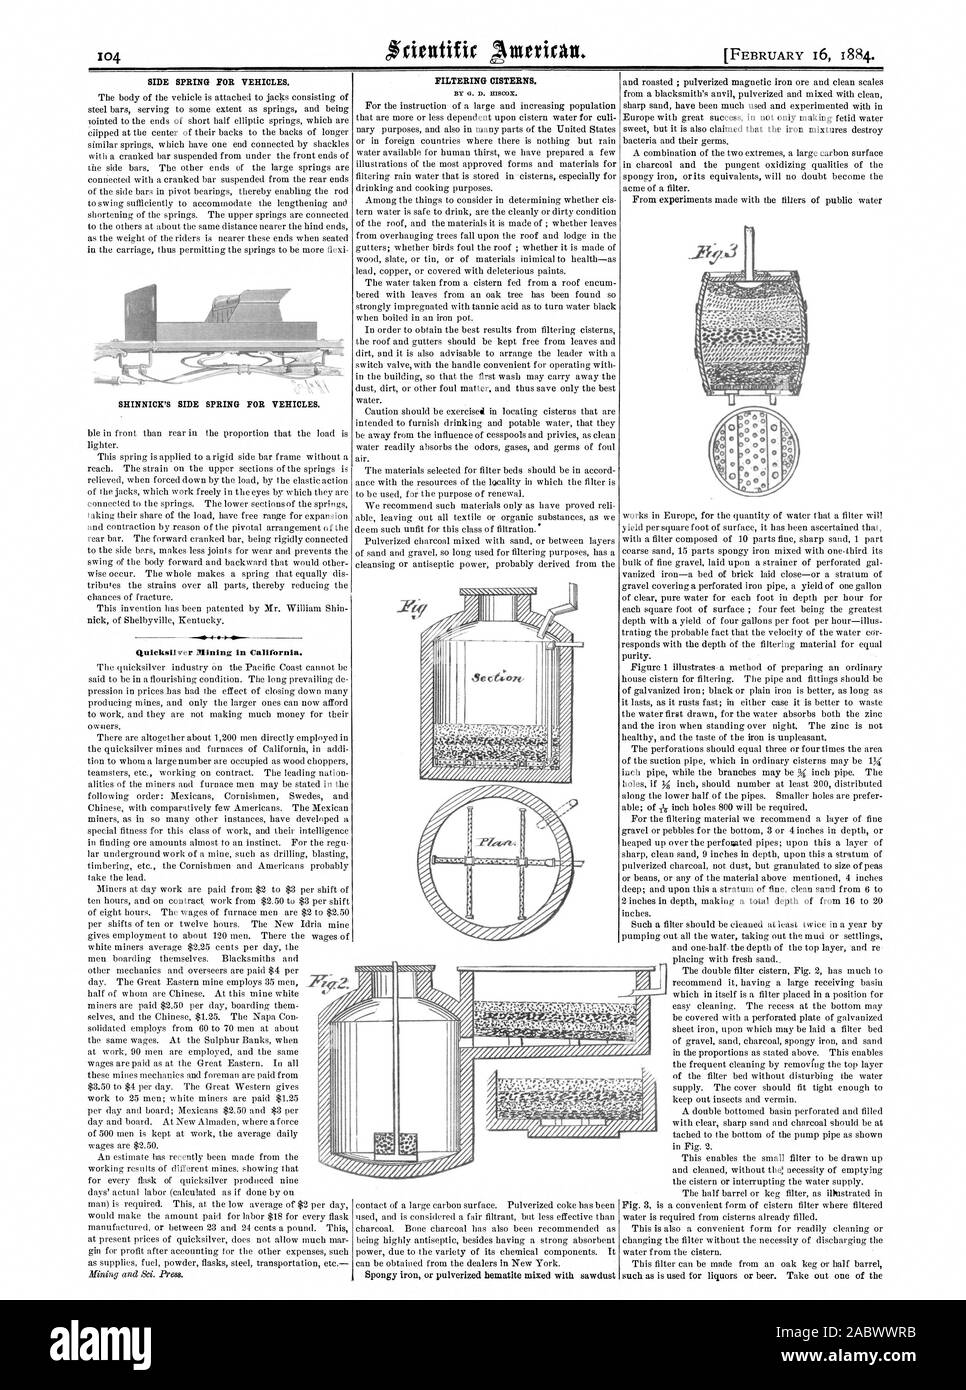 SIDE SPRING FOR VEHICLES. SHINNICK'S SIDE SPRING FOR VEHICLES. Quicksilver Mining in California. FILTERING CISTERNS. -1 Ale Zff Ale, scientific american, 1884-02-16 Stock Photo